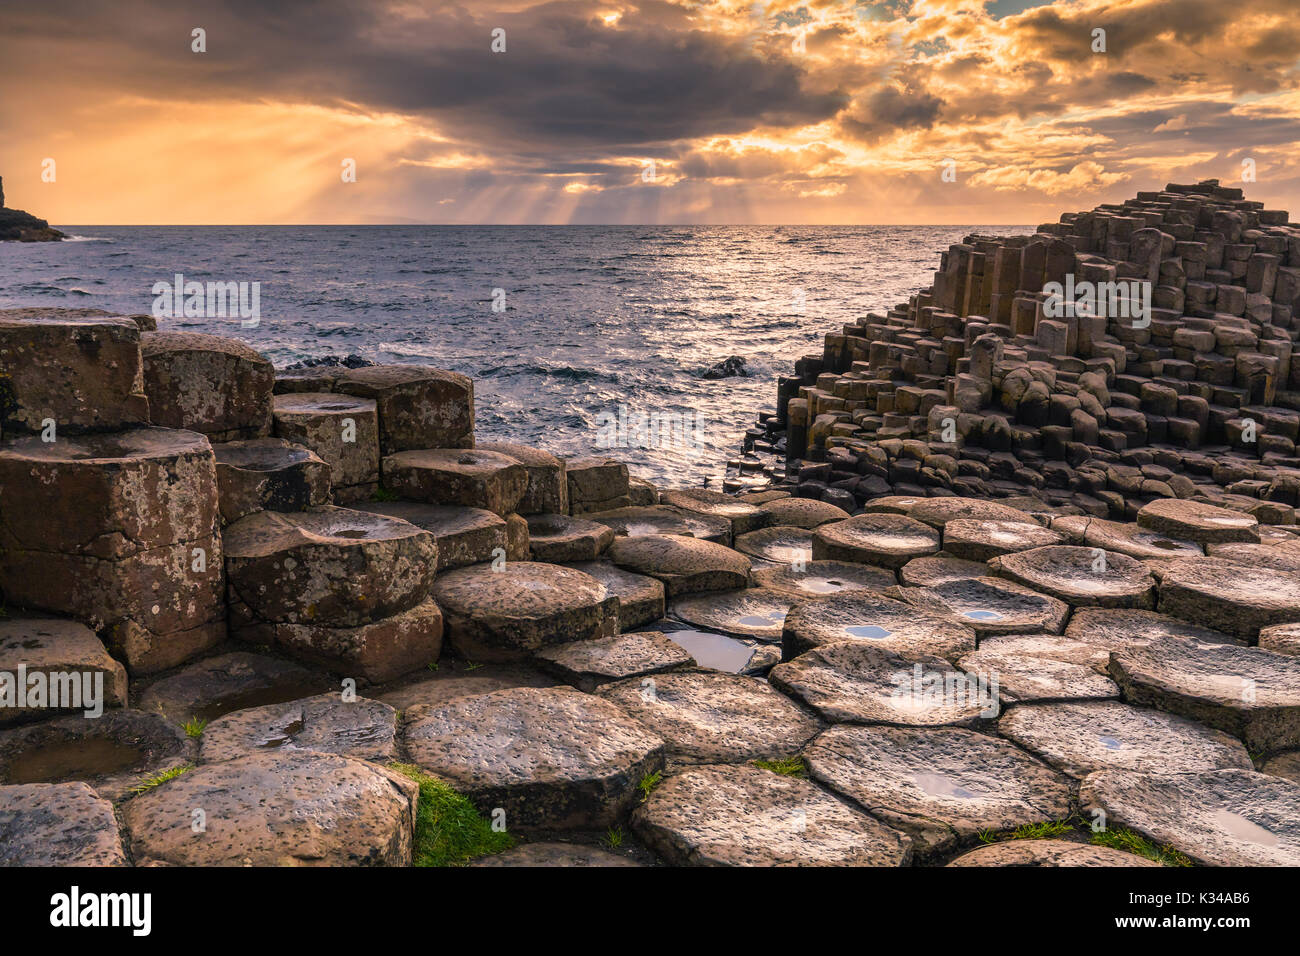 The Giant's Causeway is an area of about 40,000 interlocking basalt columns, the result of an ancient volcanic eruption. It is located in County Antri Stock Photo